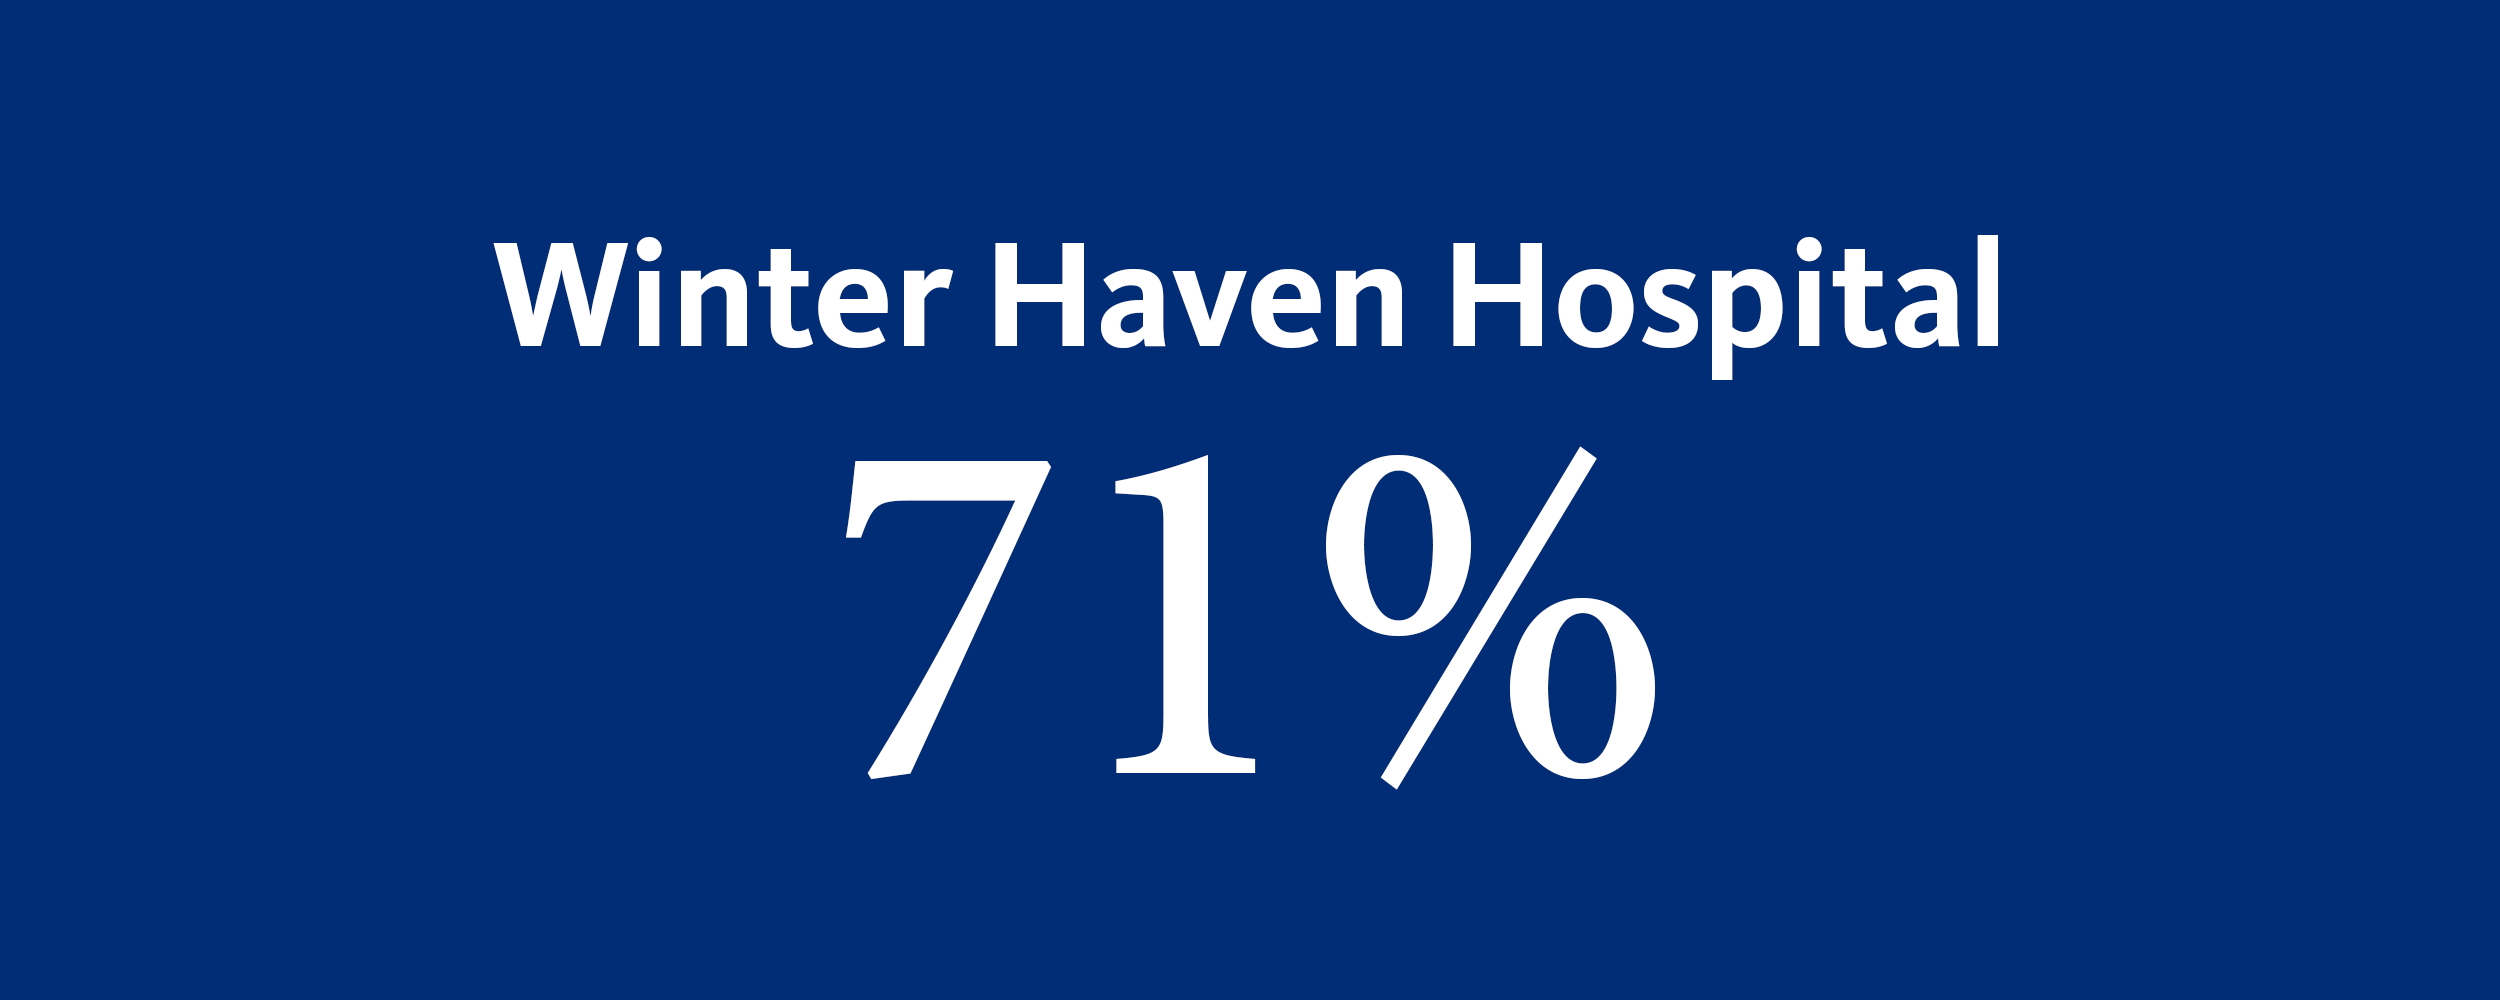 Winter Haven Hospital overall recommendation